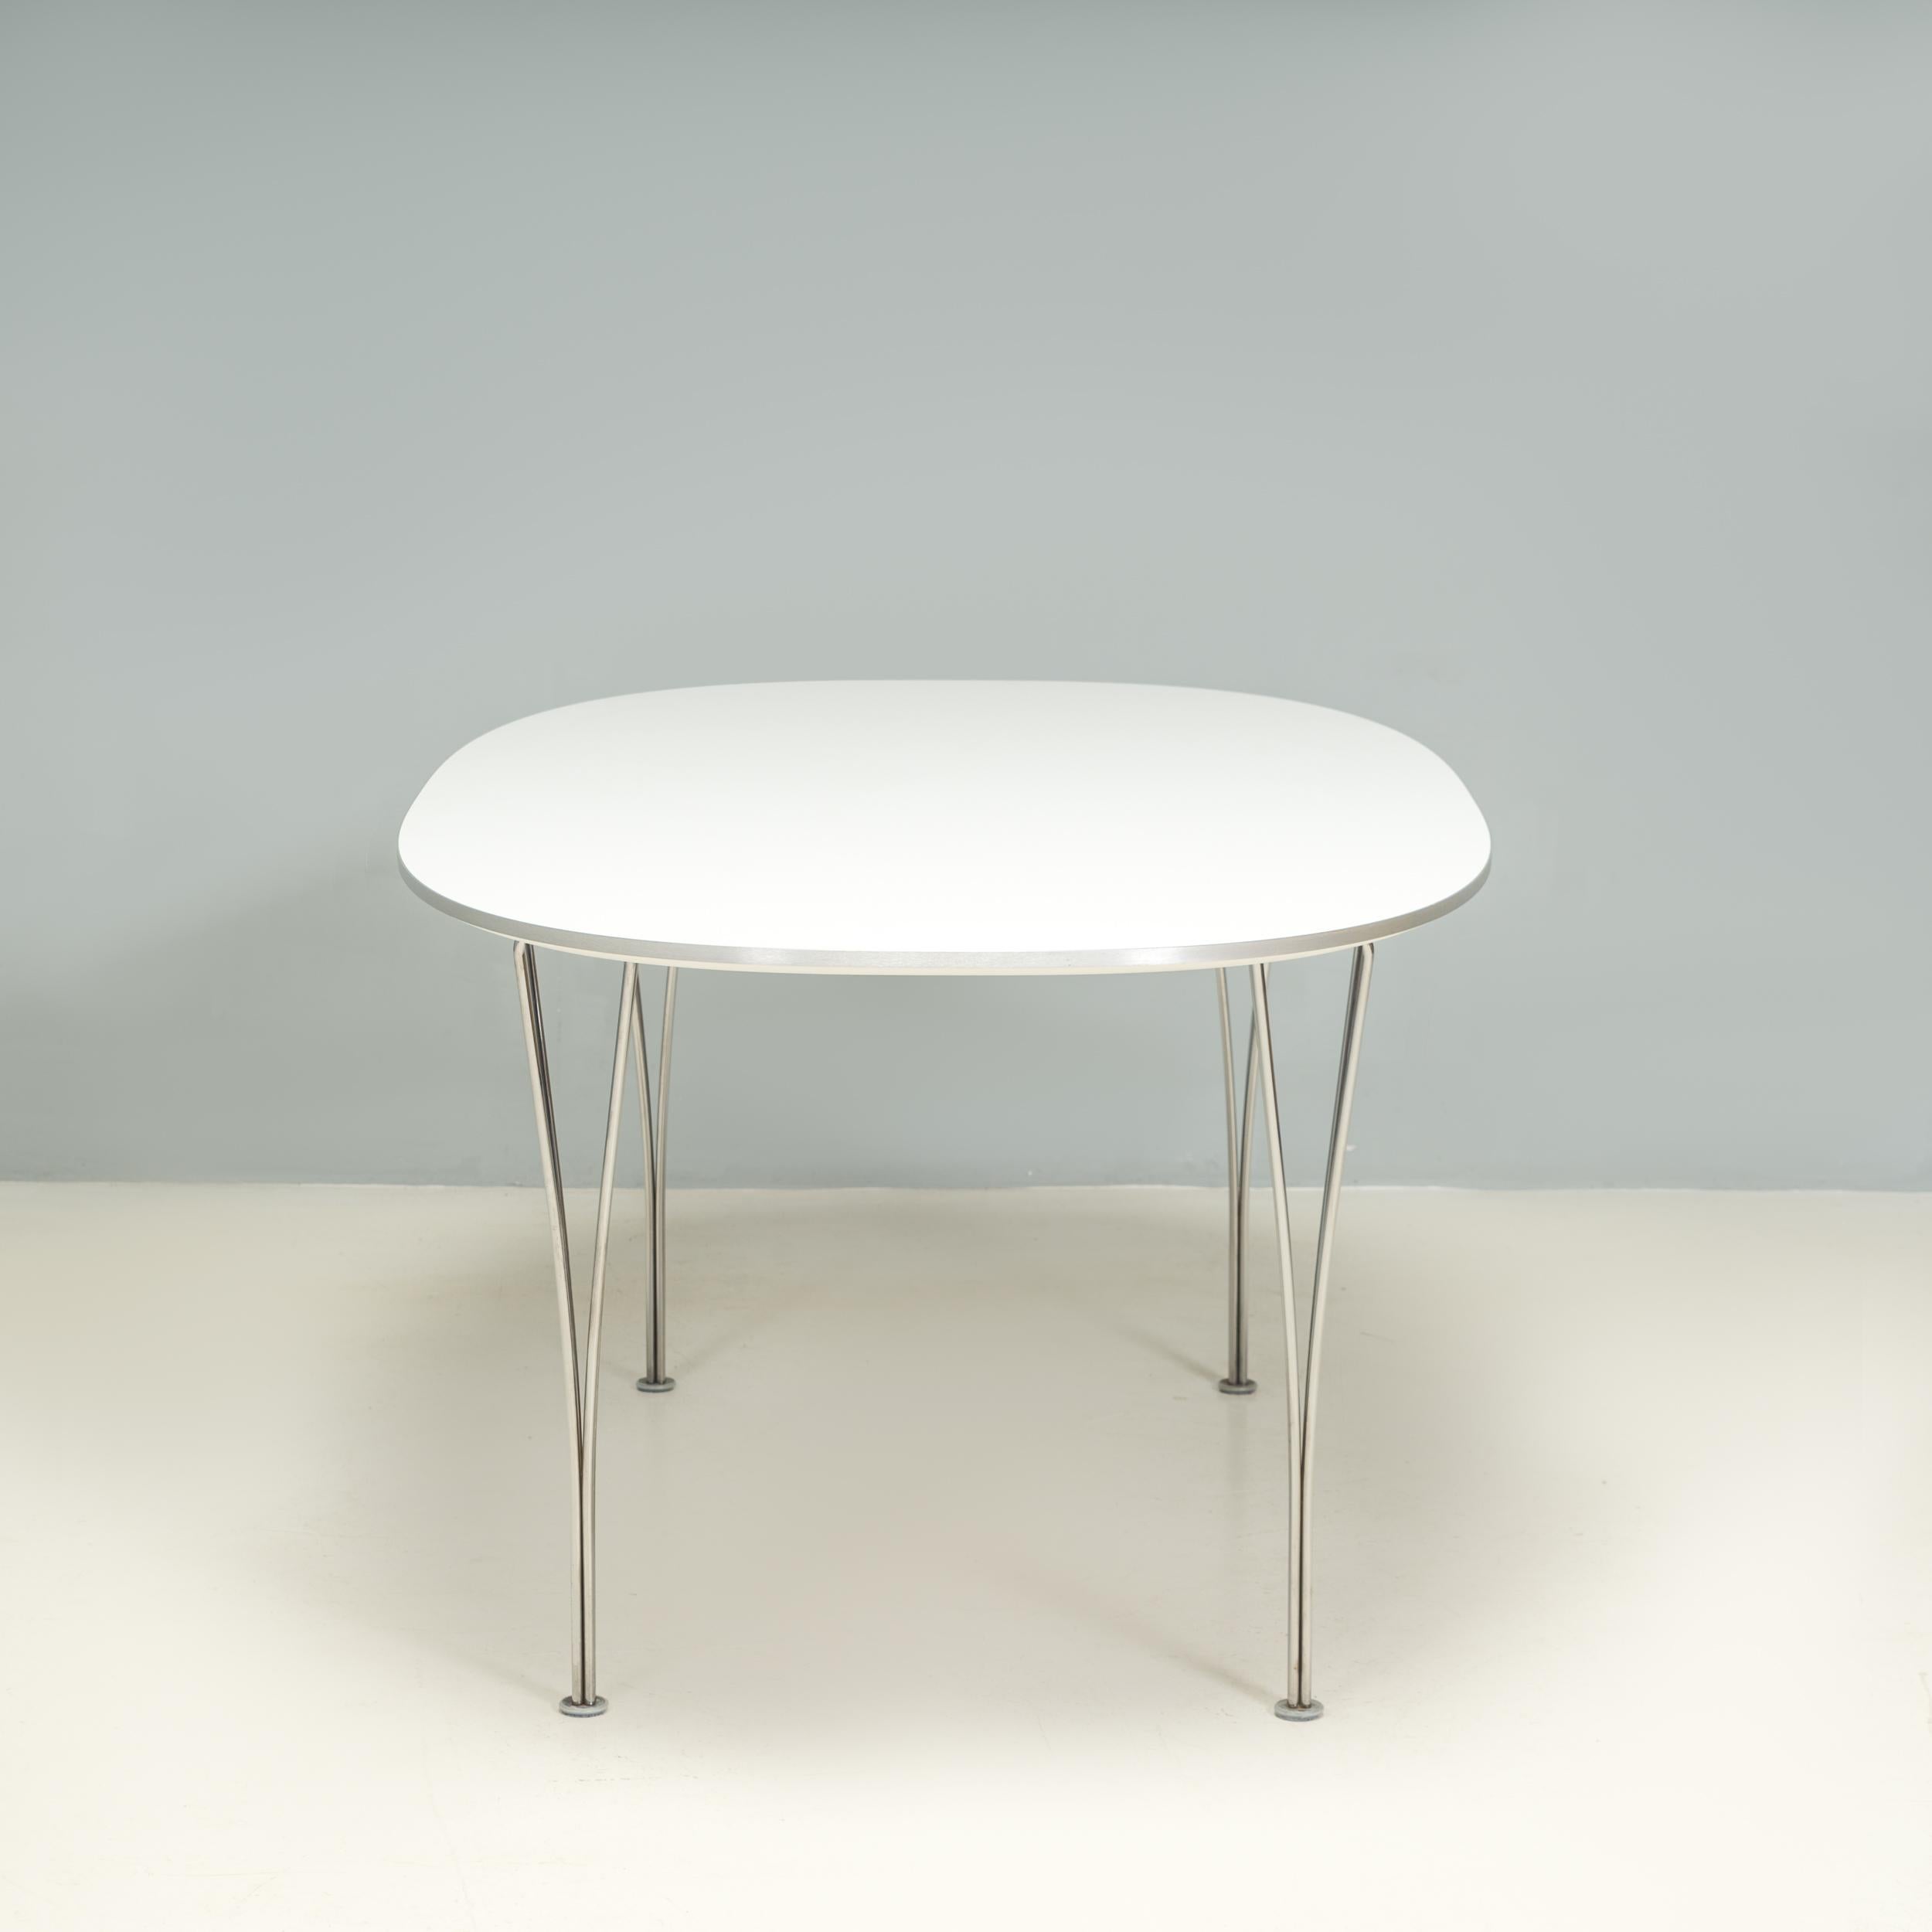 Originally designed by Piet Hein and Bruno Mathsson in 1966, this Super-Ellipse table remains a contemporary piece of design.

Constructed with a white wood veneer top, the table sits on chromed steel legs and features rounded corners to create the